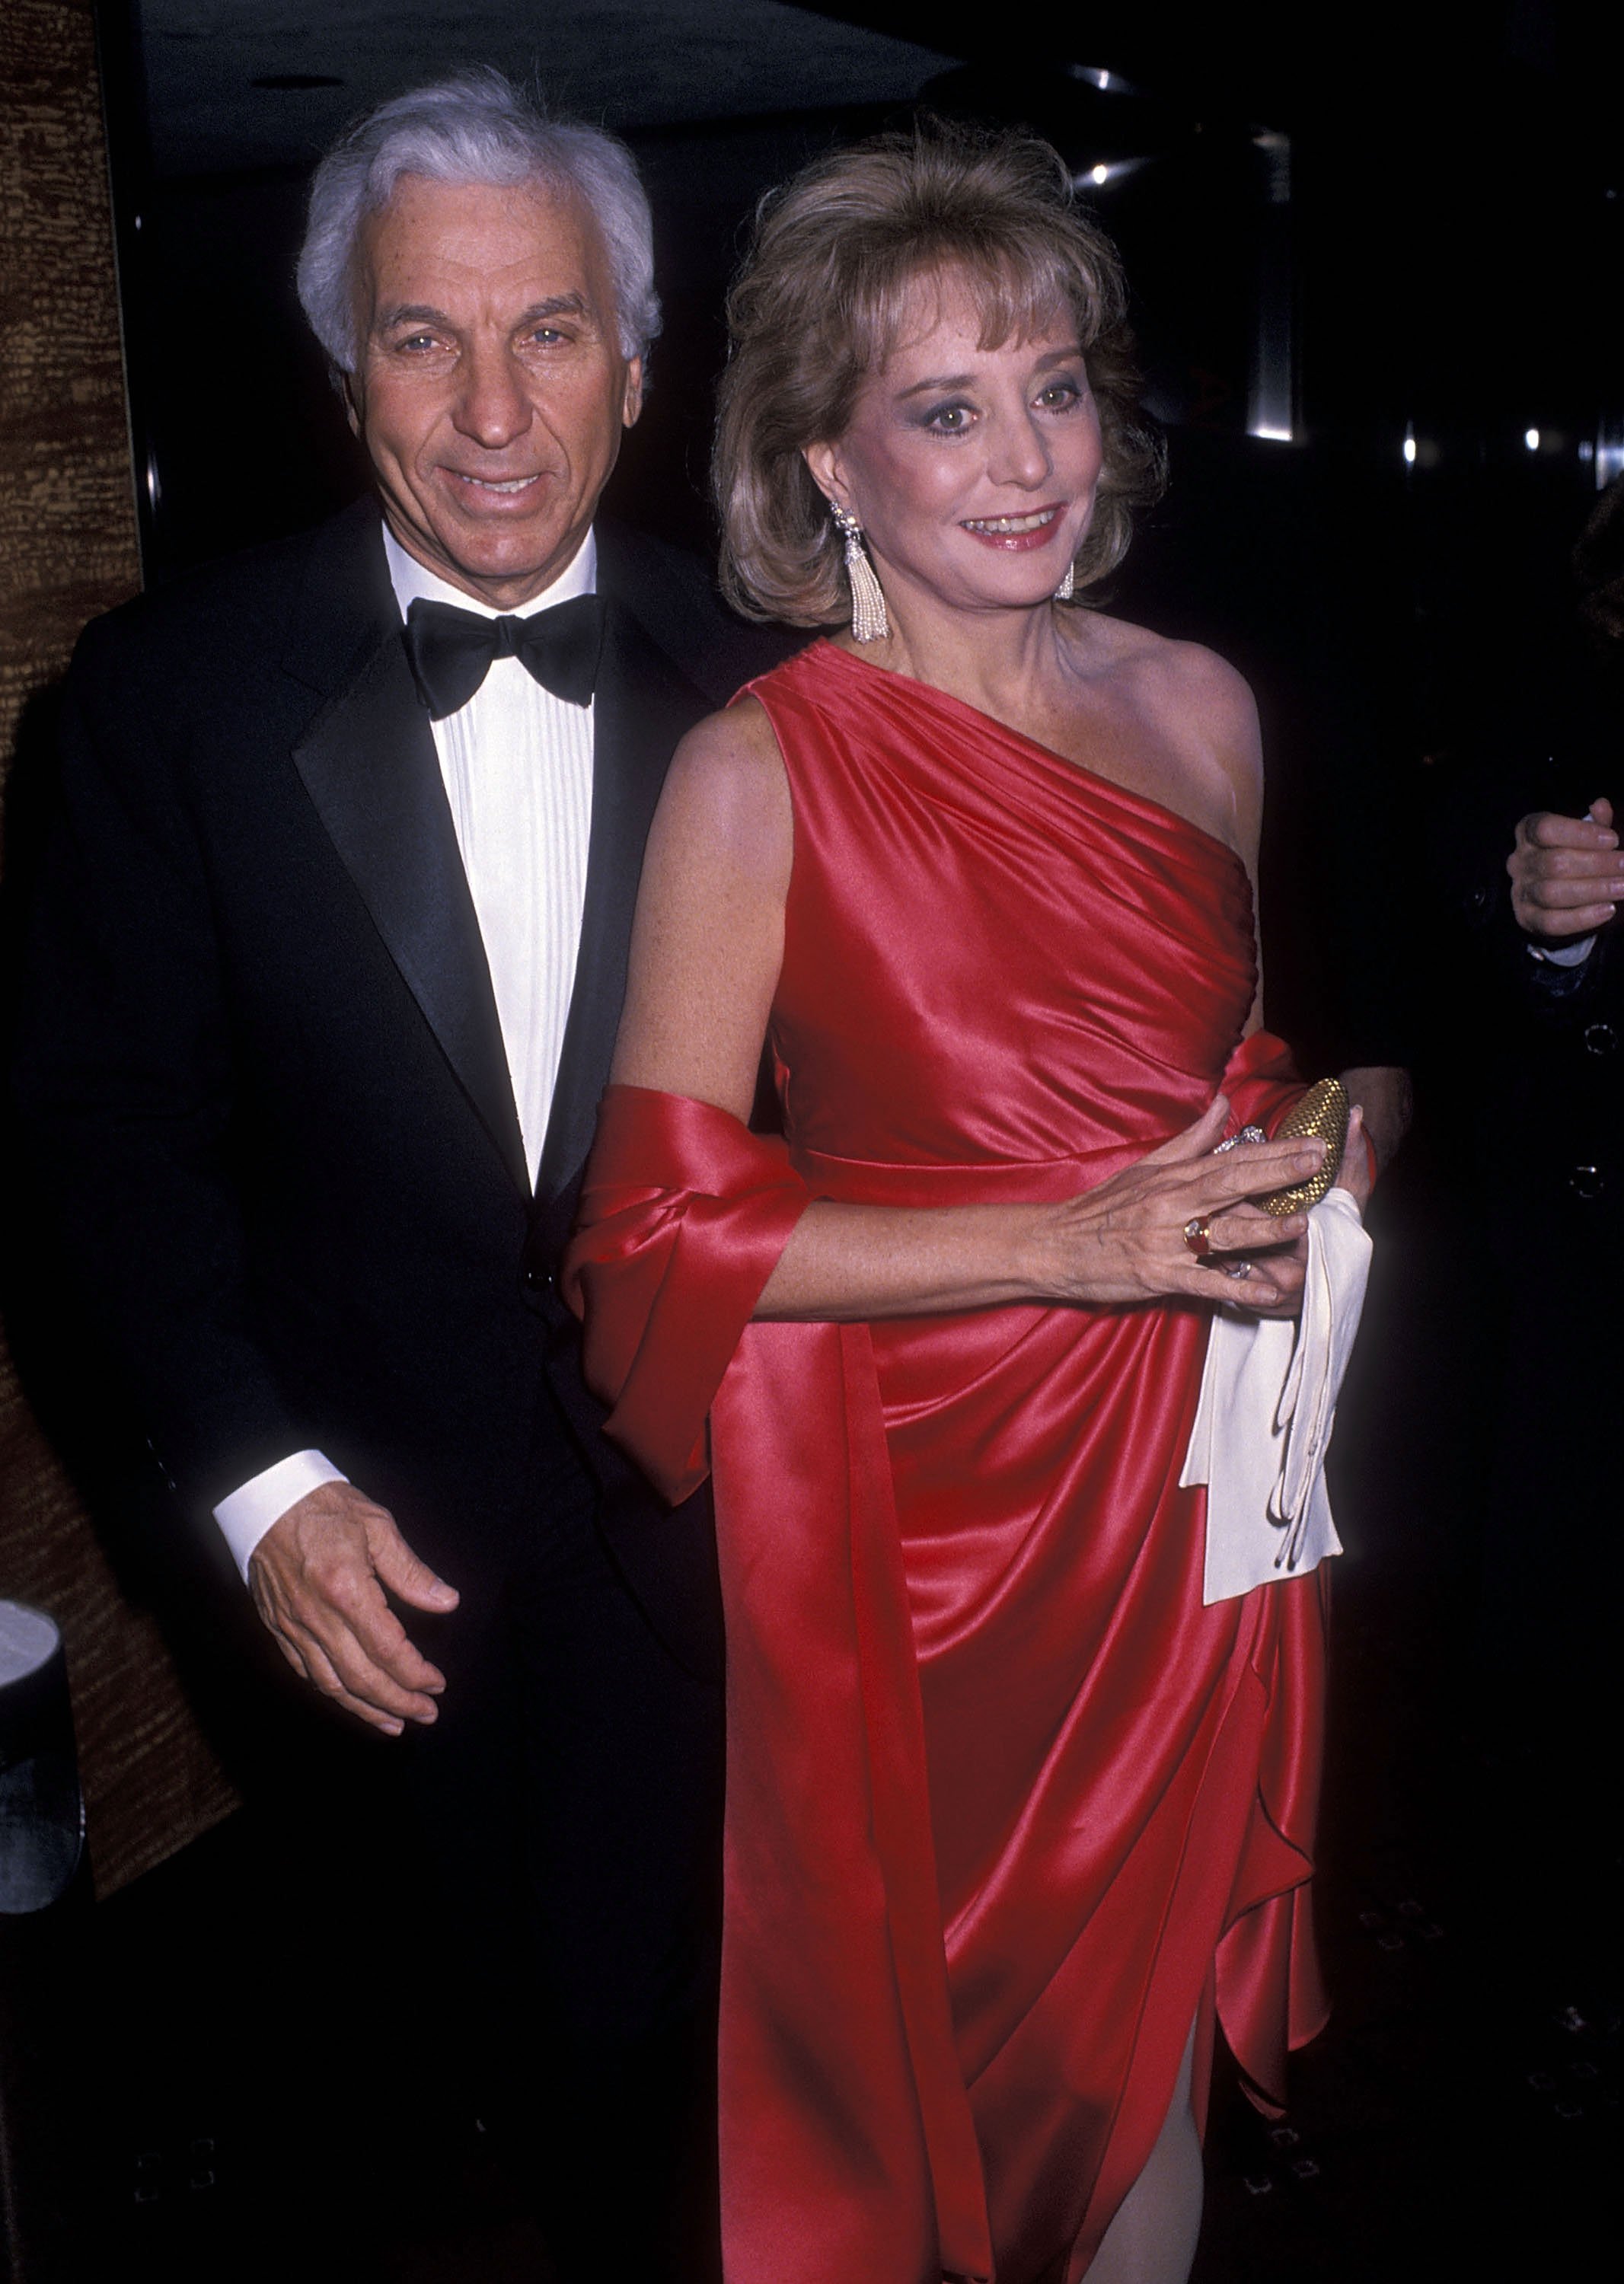 Barabara Walters and entertainment executive Merv Adelson attending the American Museum of the Moving Image Honors Sidney Poitier at the Waldorf-Astoria Hotel on February 28, 1989 in New York City. / Source: Getty Images